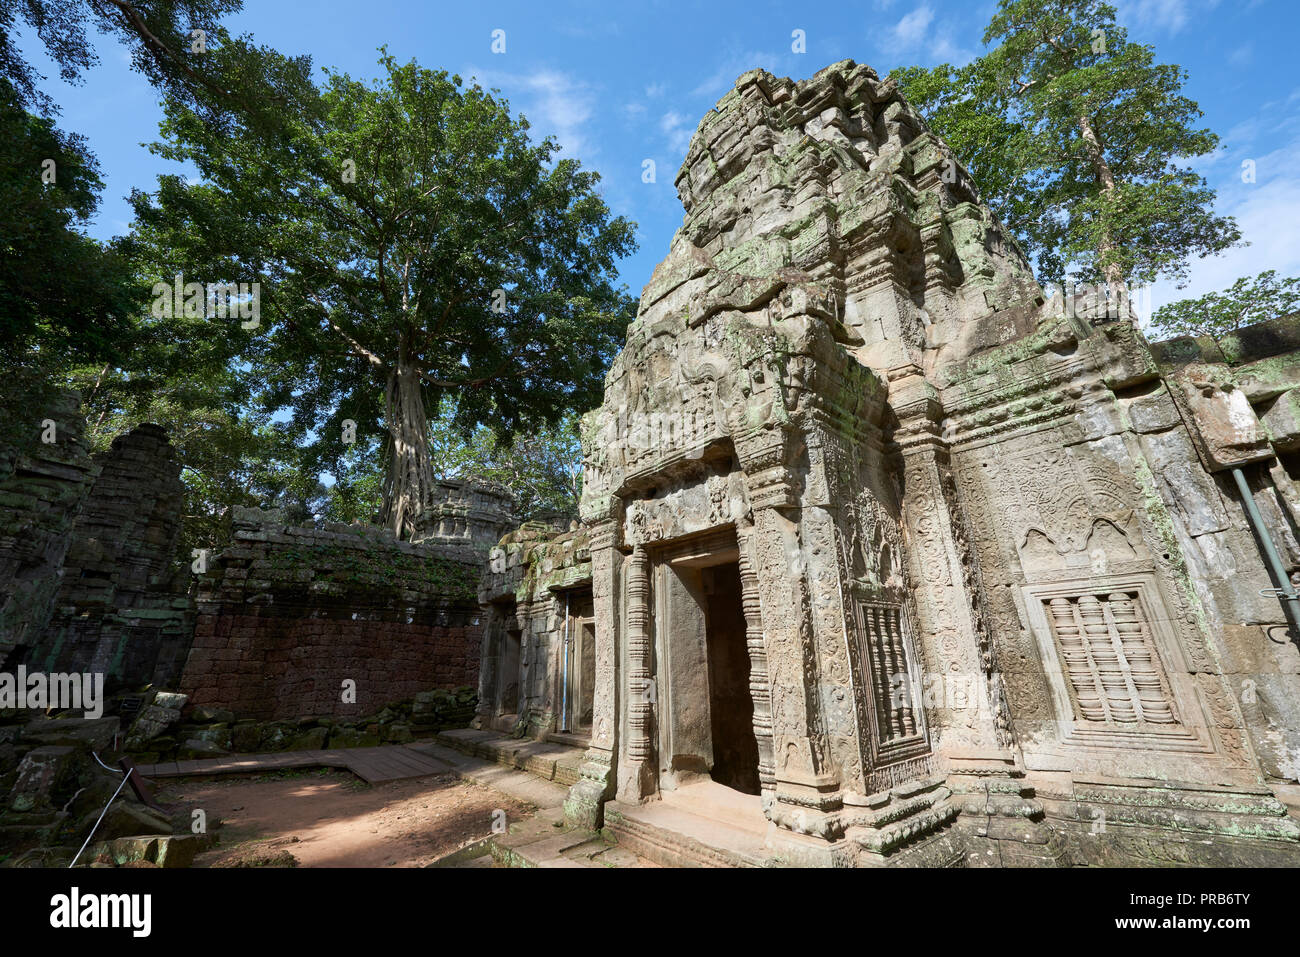 Ta Prohm ruins in Angkor Wat. The Angkor Wat complex, Built during the Khmer Empire age, located in Siem Reap, Cambodia, is the largest religious monu Stock Photo